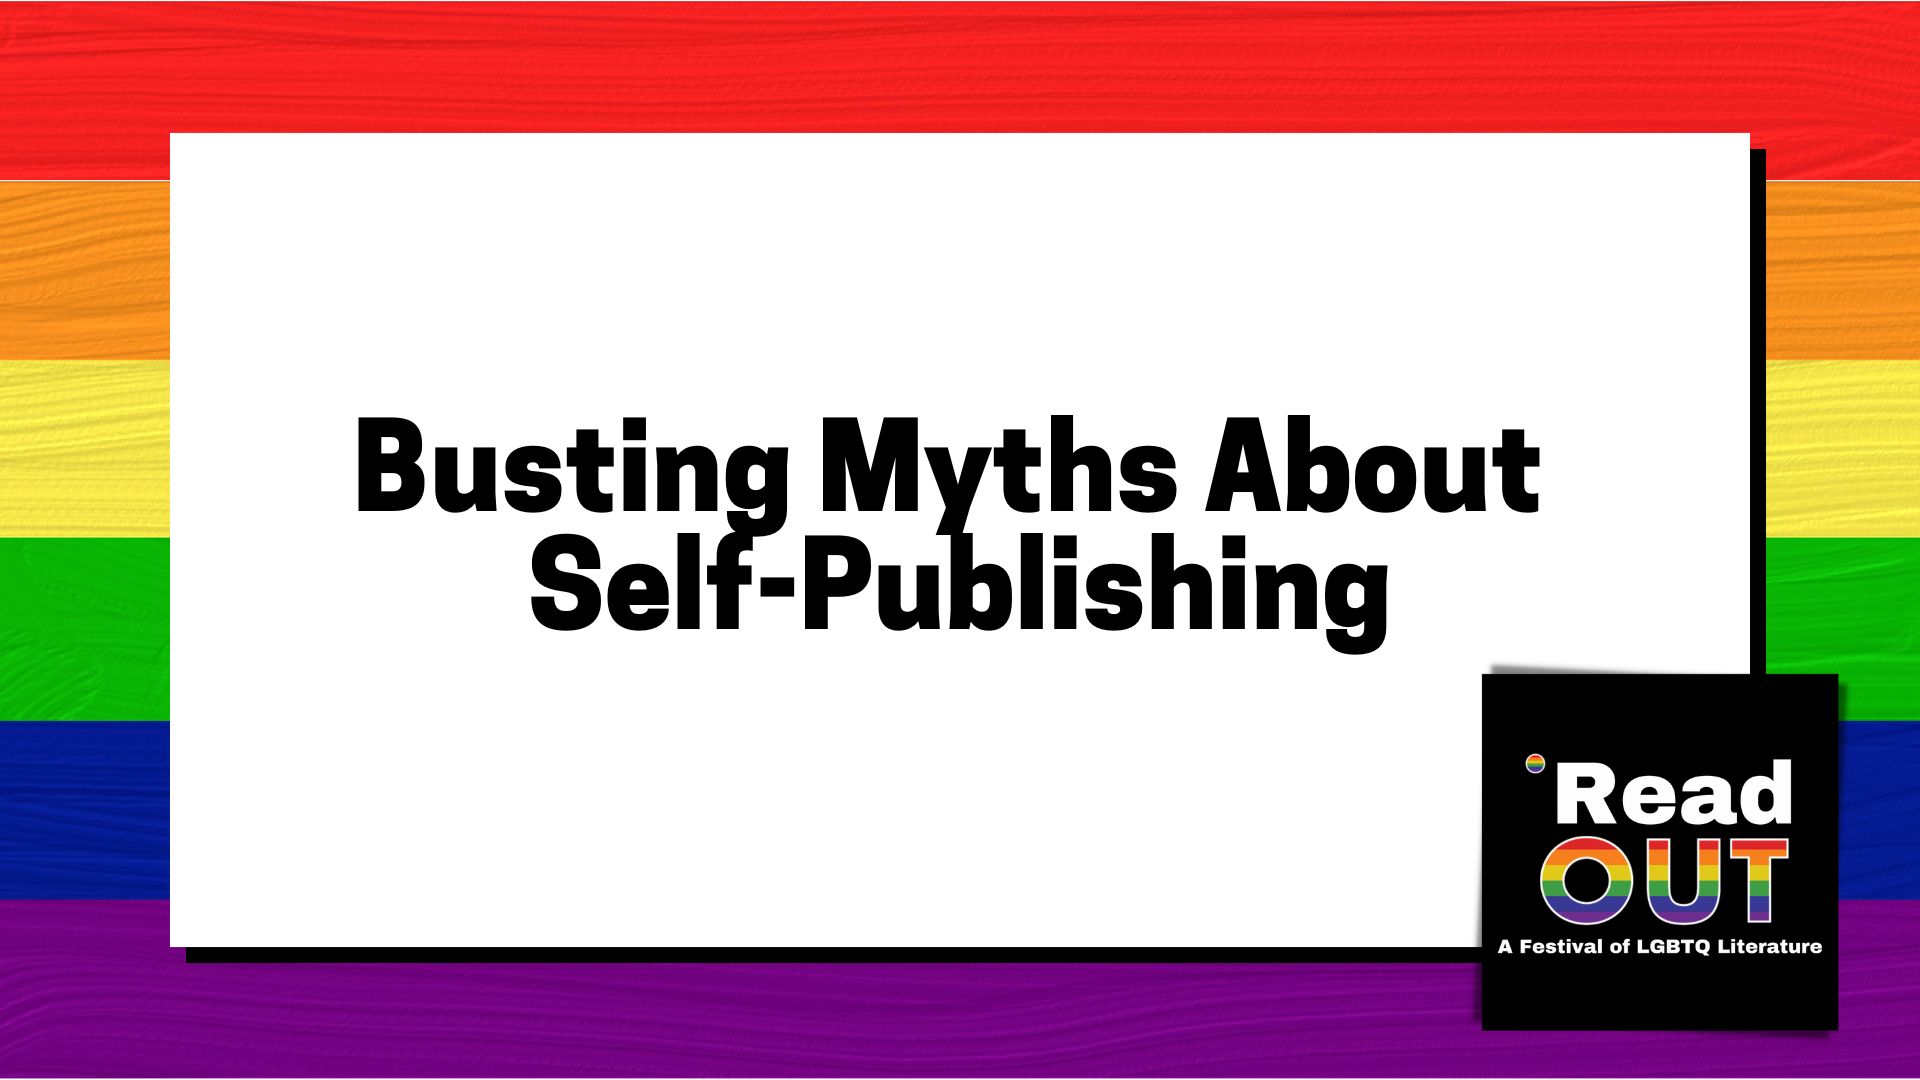 Busting Myths About Self-Publishing